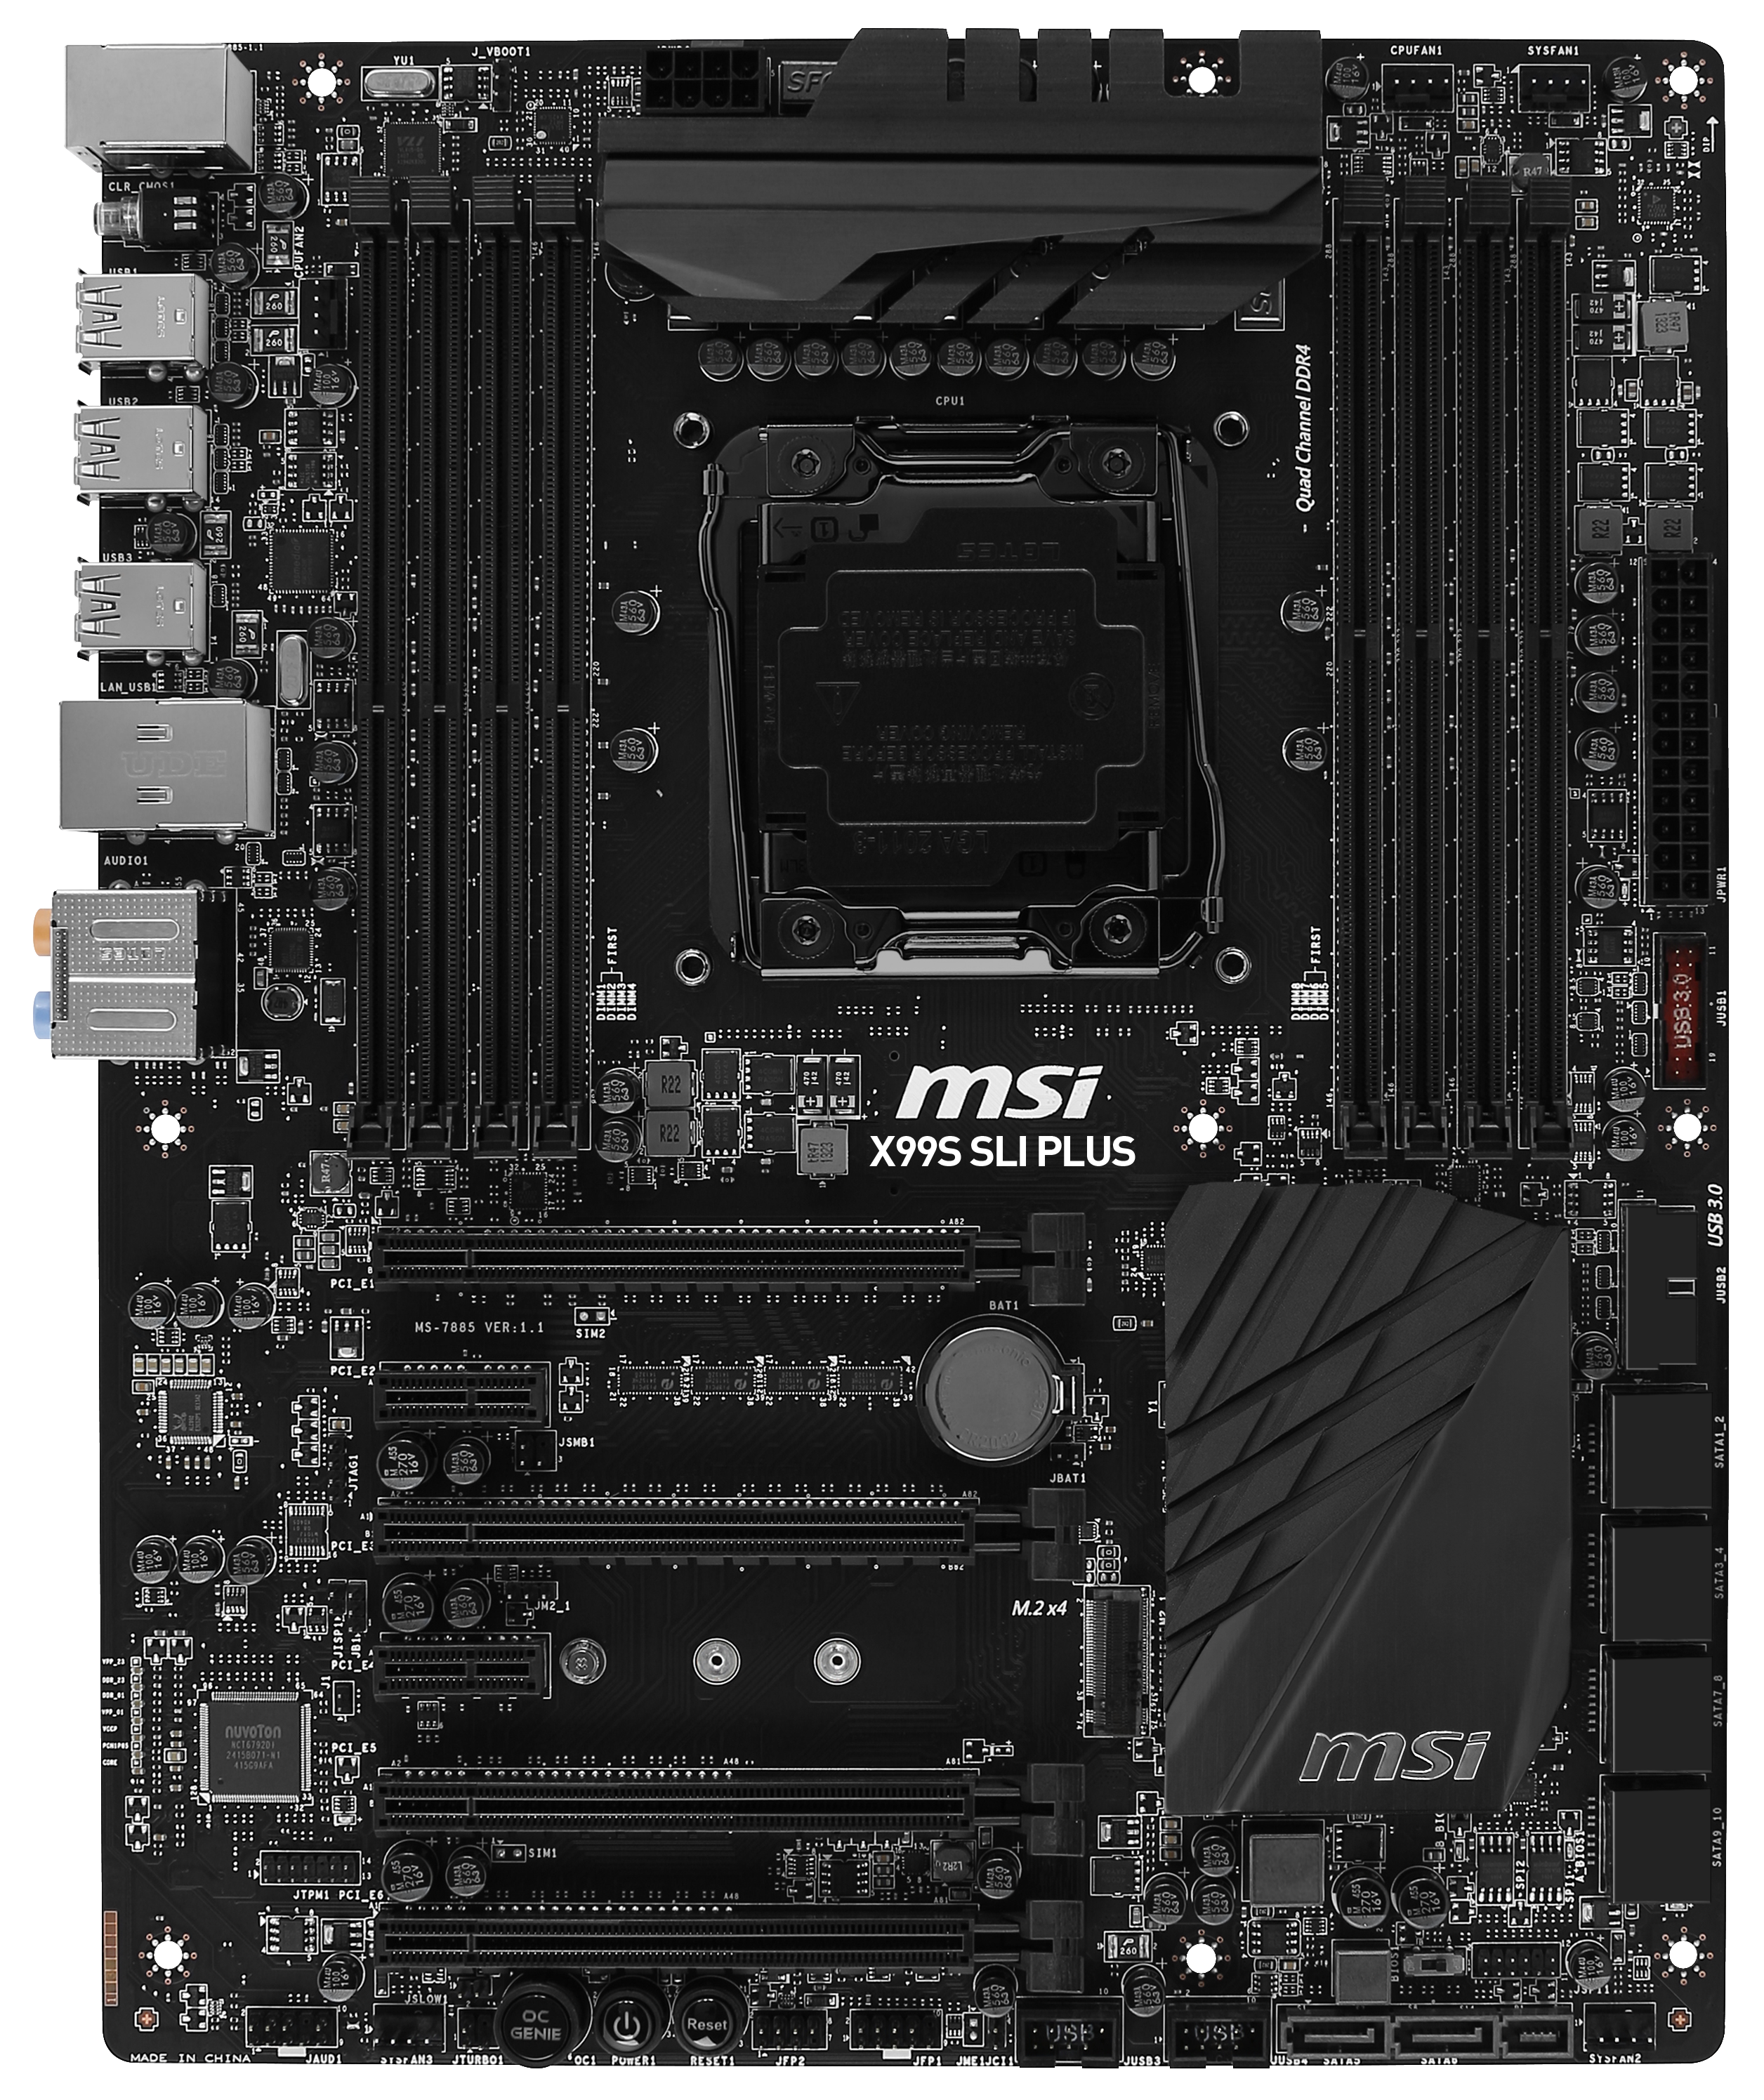 MSI X99S SLI Plus Overview, Board Features - The Intel Haswell-E